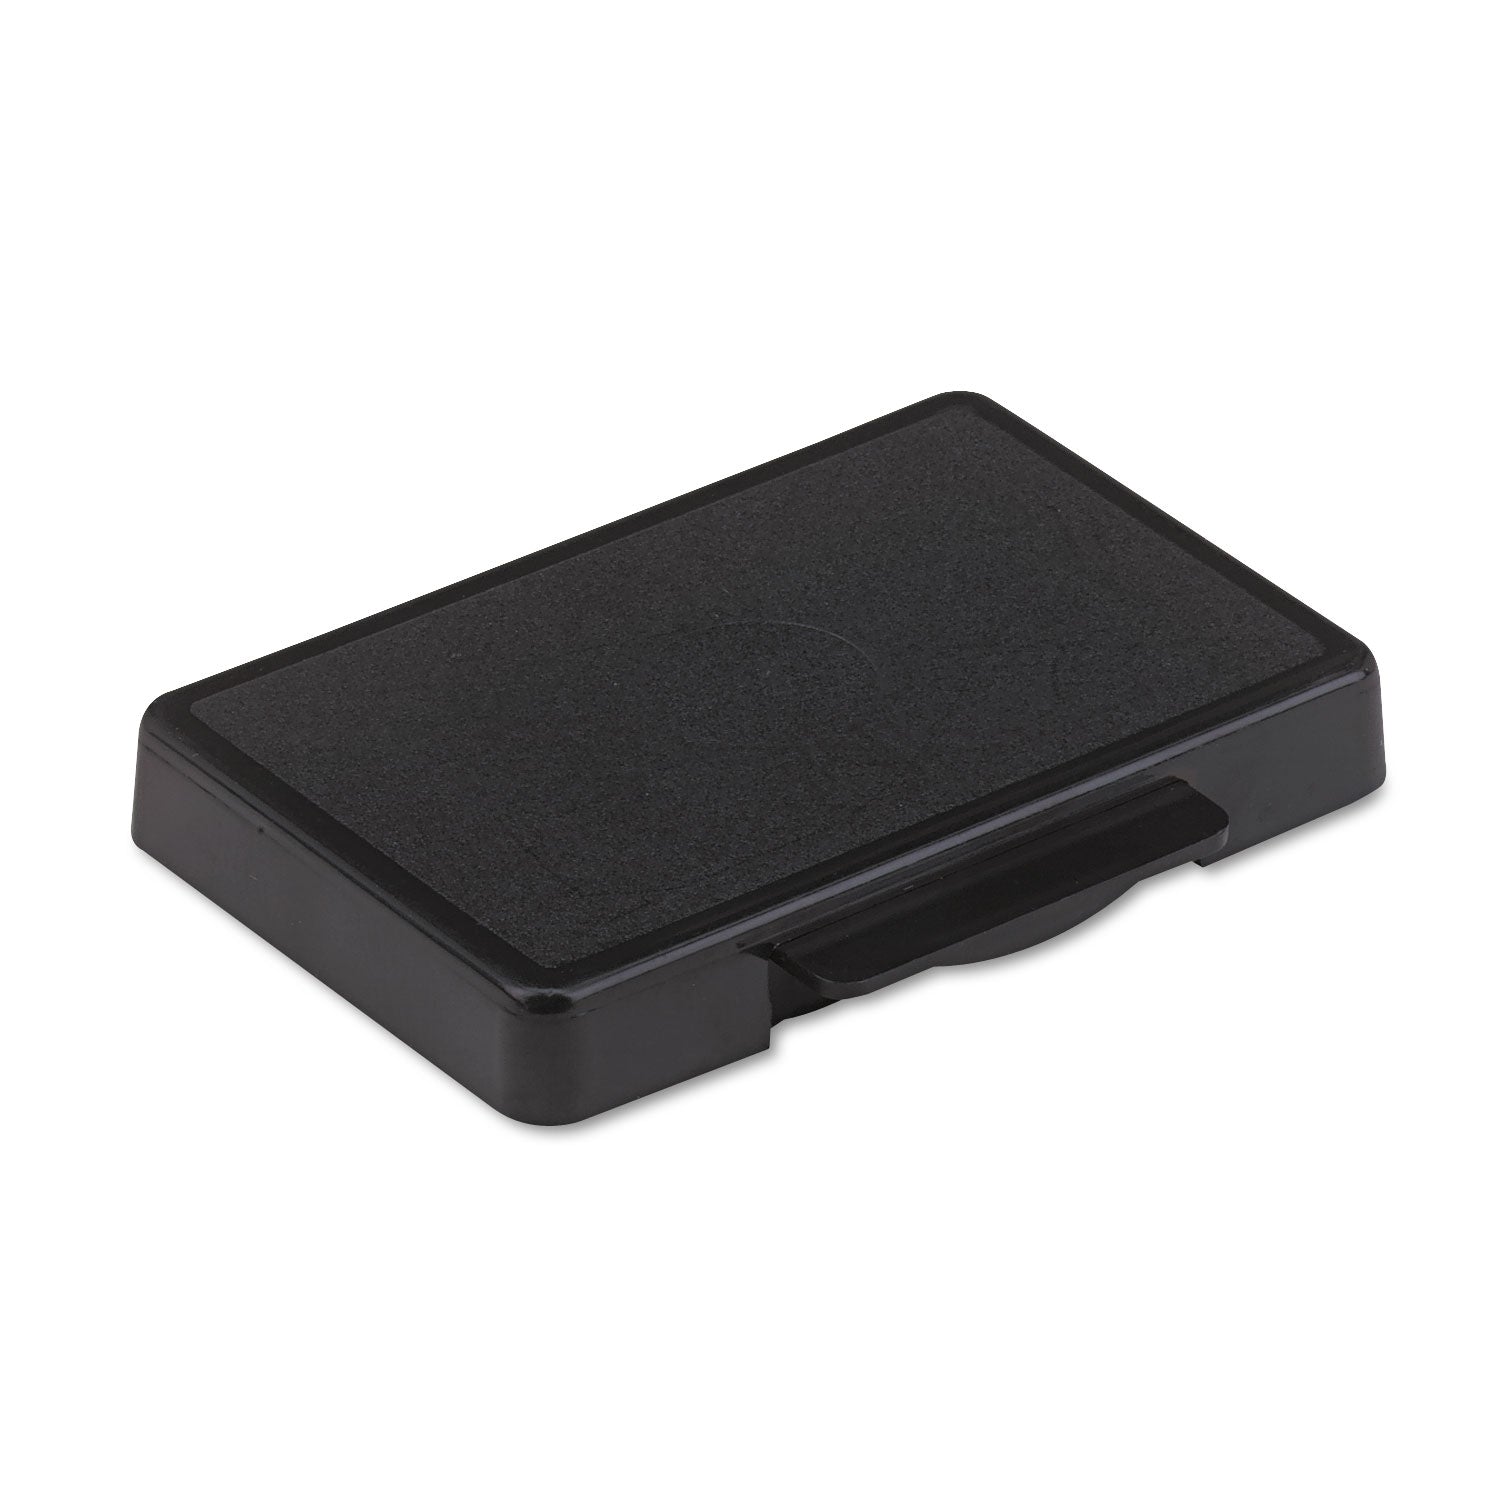 T5440 Professional Replacement Ink Pad for Trodat Custom Self-Inking Stamps, 1.13" x 2", Black - 